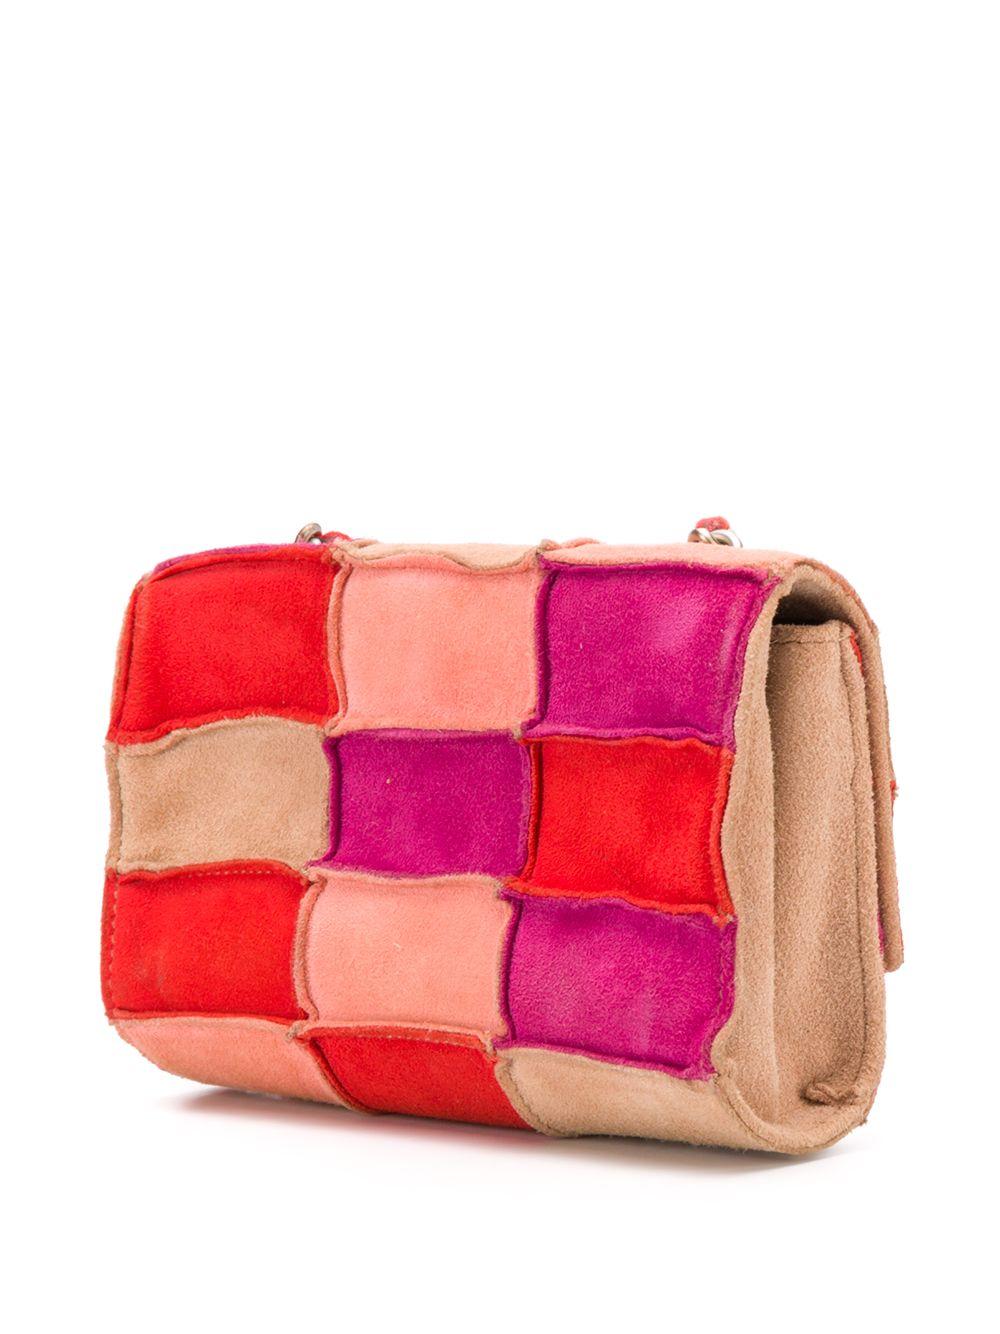 Crafted in France from luxurious suede in a vibrant palette of red, magenta, rust and camel, this timeless mini crossbody bag by Chanel features a square, patchwork paneled exterior, a rear slip pocket a red leather-laced chain shoulder strap that